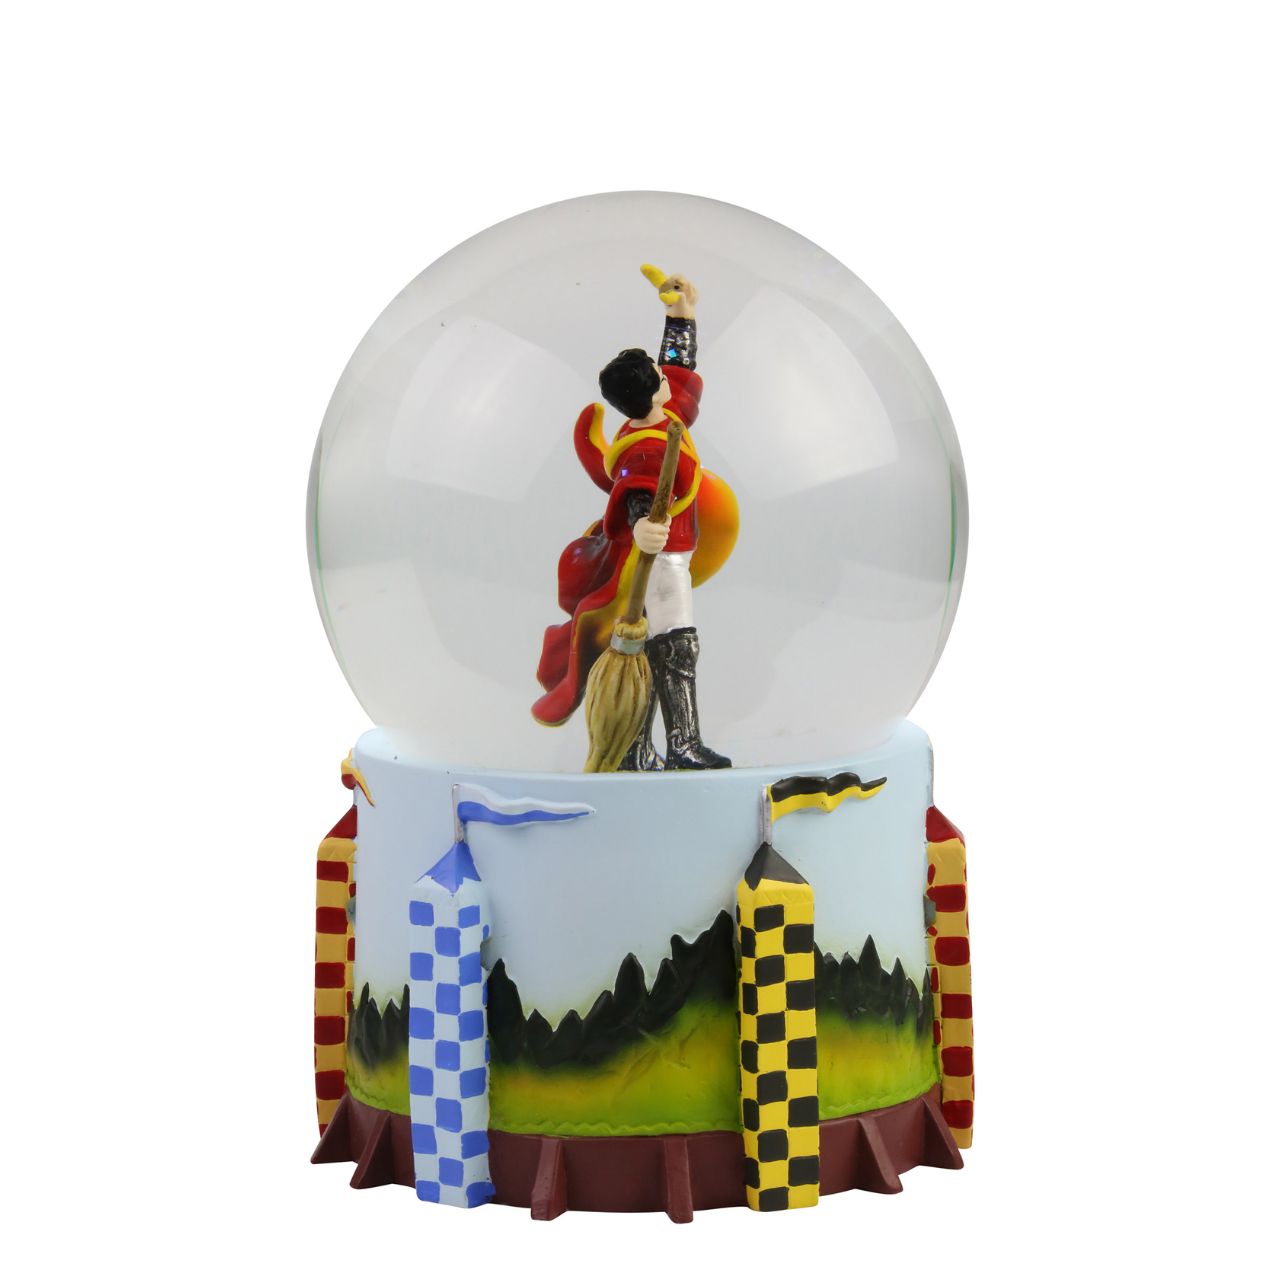 Harry Potter Quidditch Waterball  Celebrate Gryffindor's triumphant win with this Harry Potter Waterball. This is taken from the iconic scene where Harry Potter wins the Quidditch game in Harry Potter and the Philosopher's stone, by nearly swallowing the Golden Snitch and then holding it joyfully above his head.